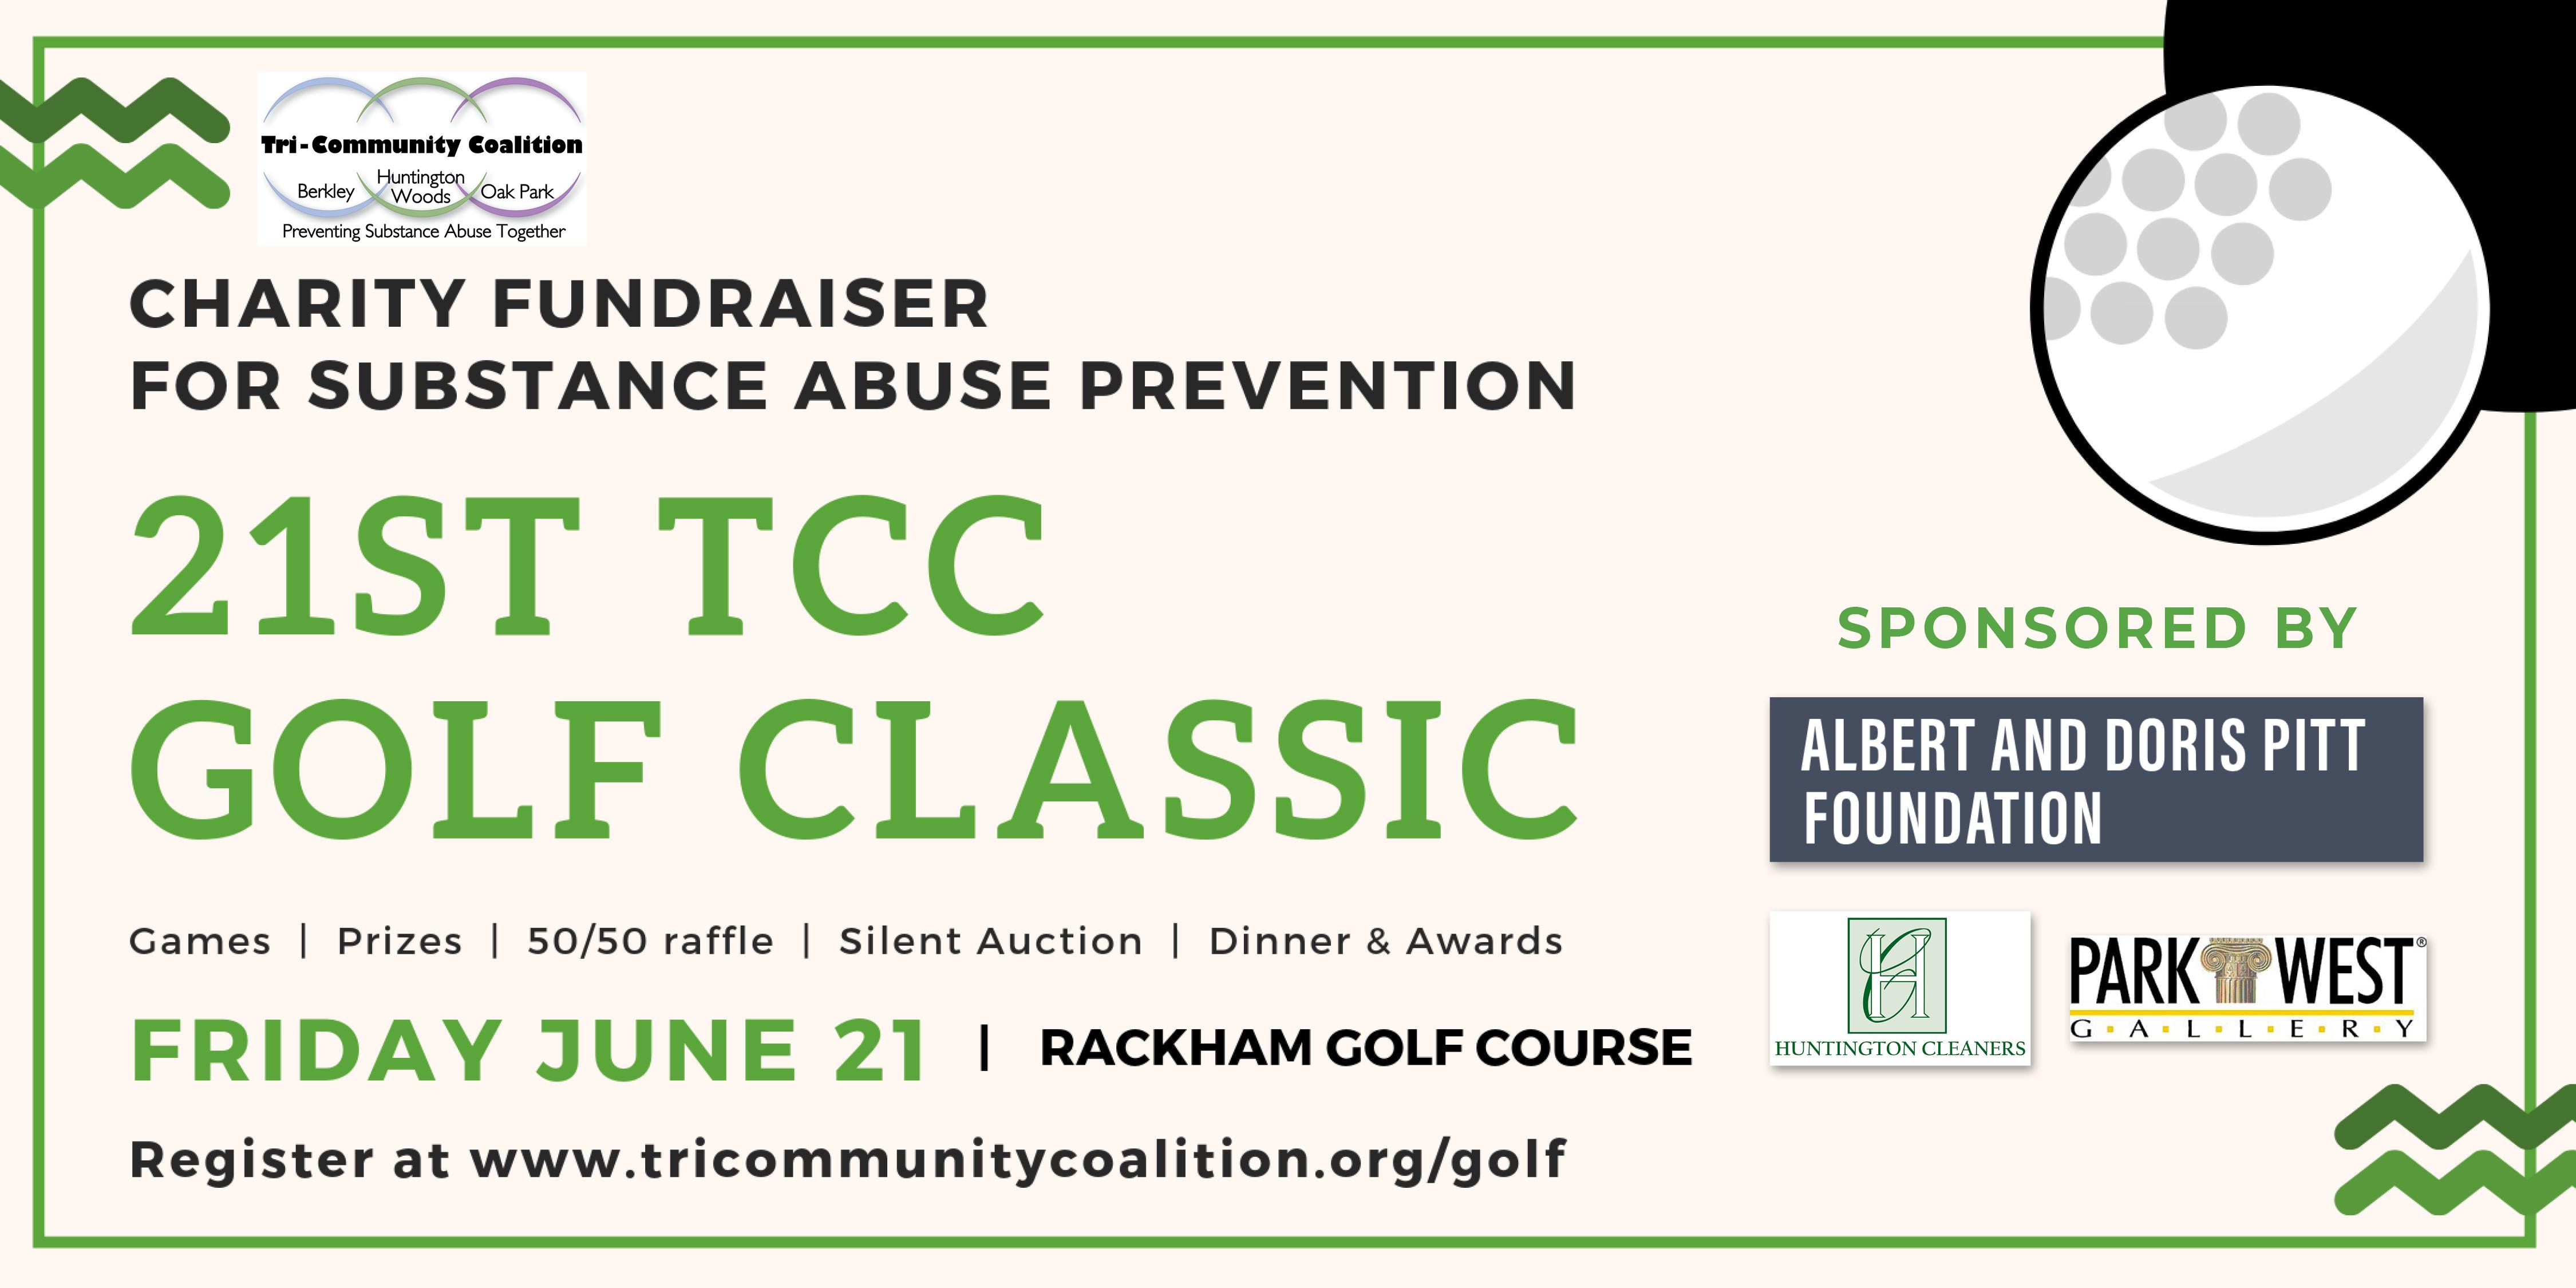 Charity Golf Classic for the Tri-Community Coalition